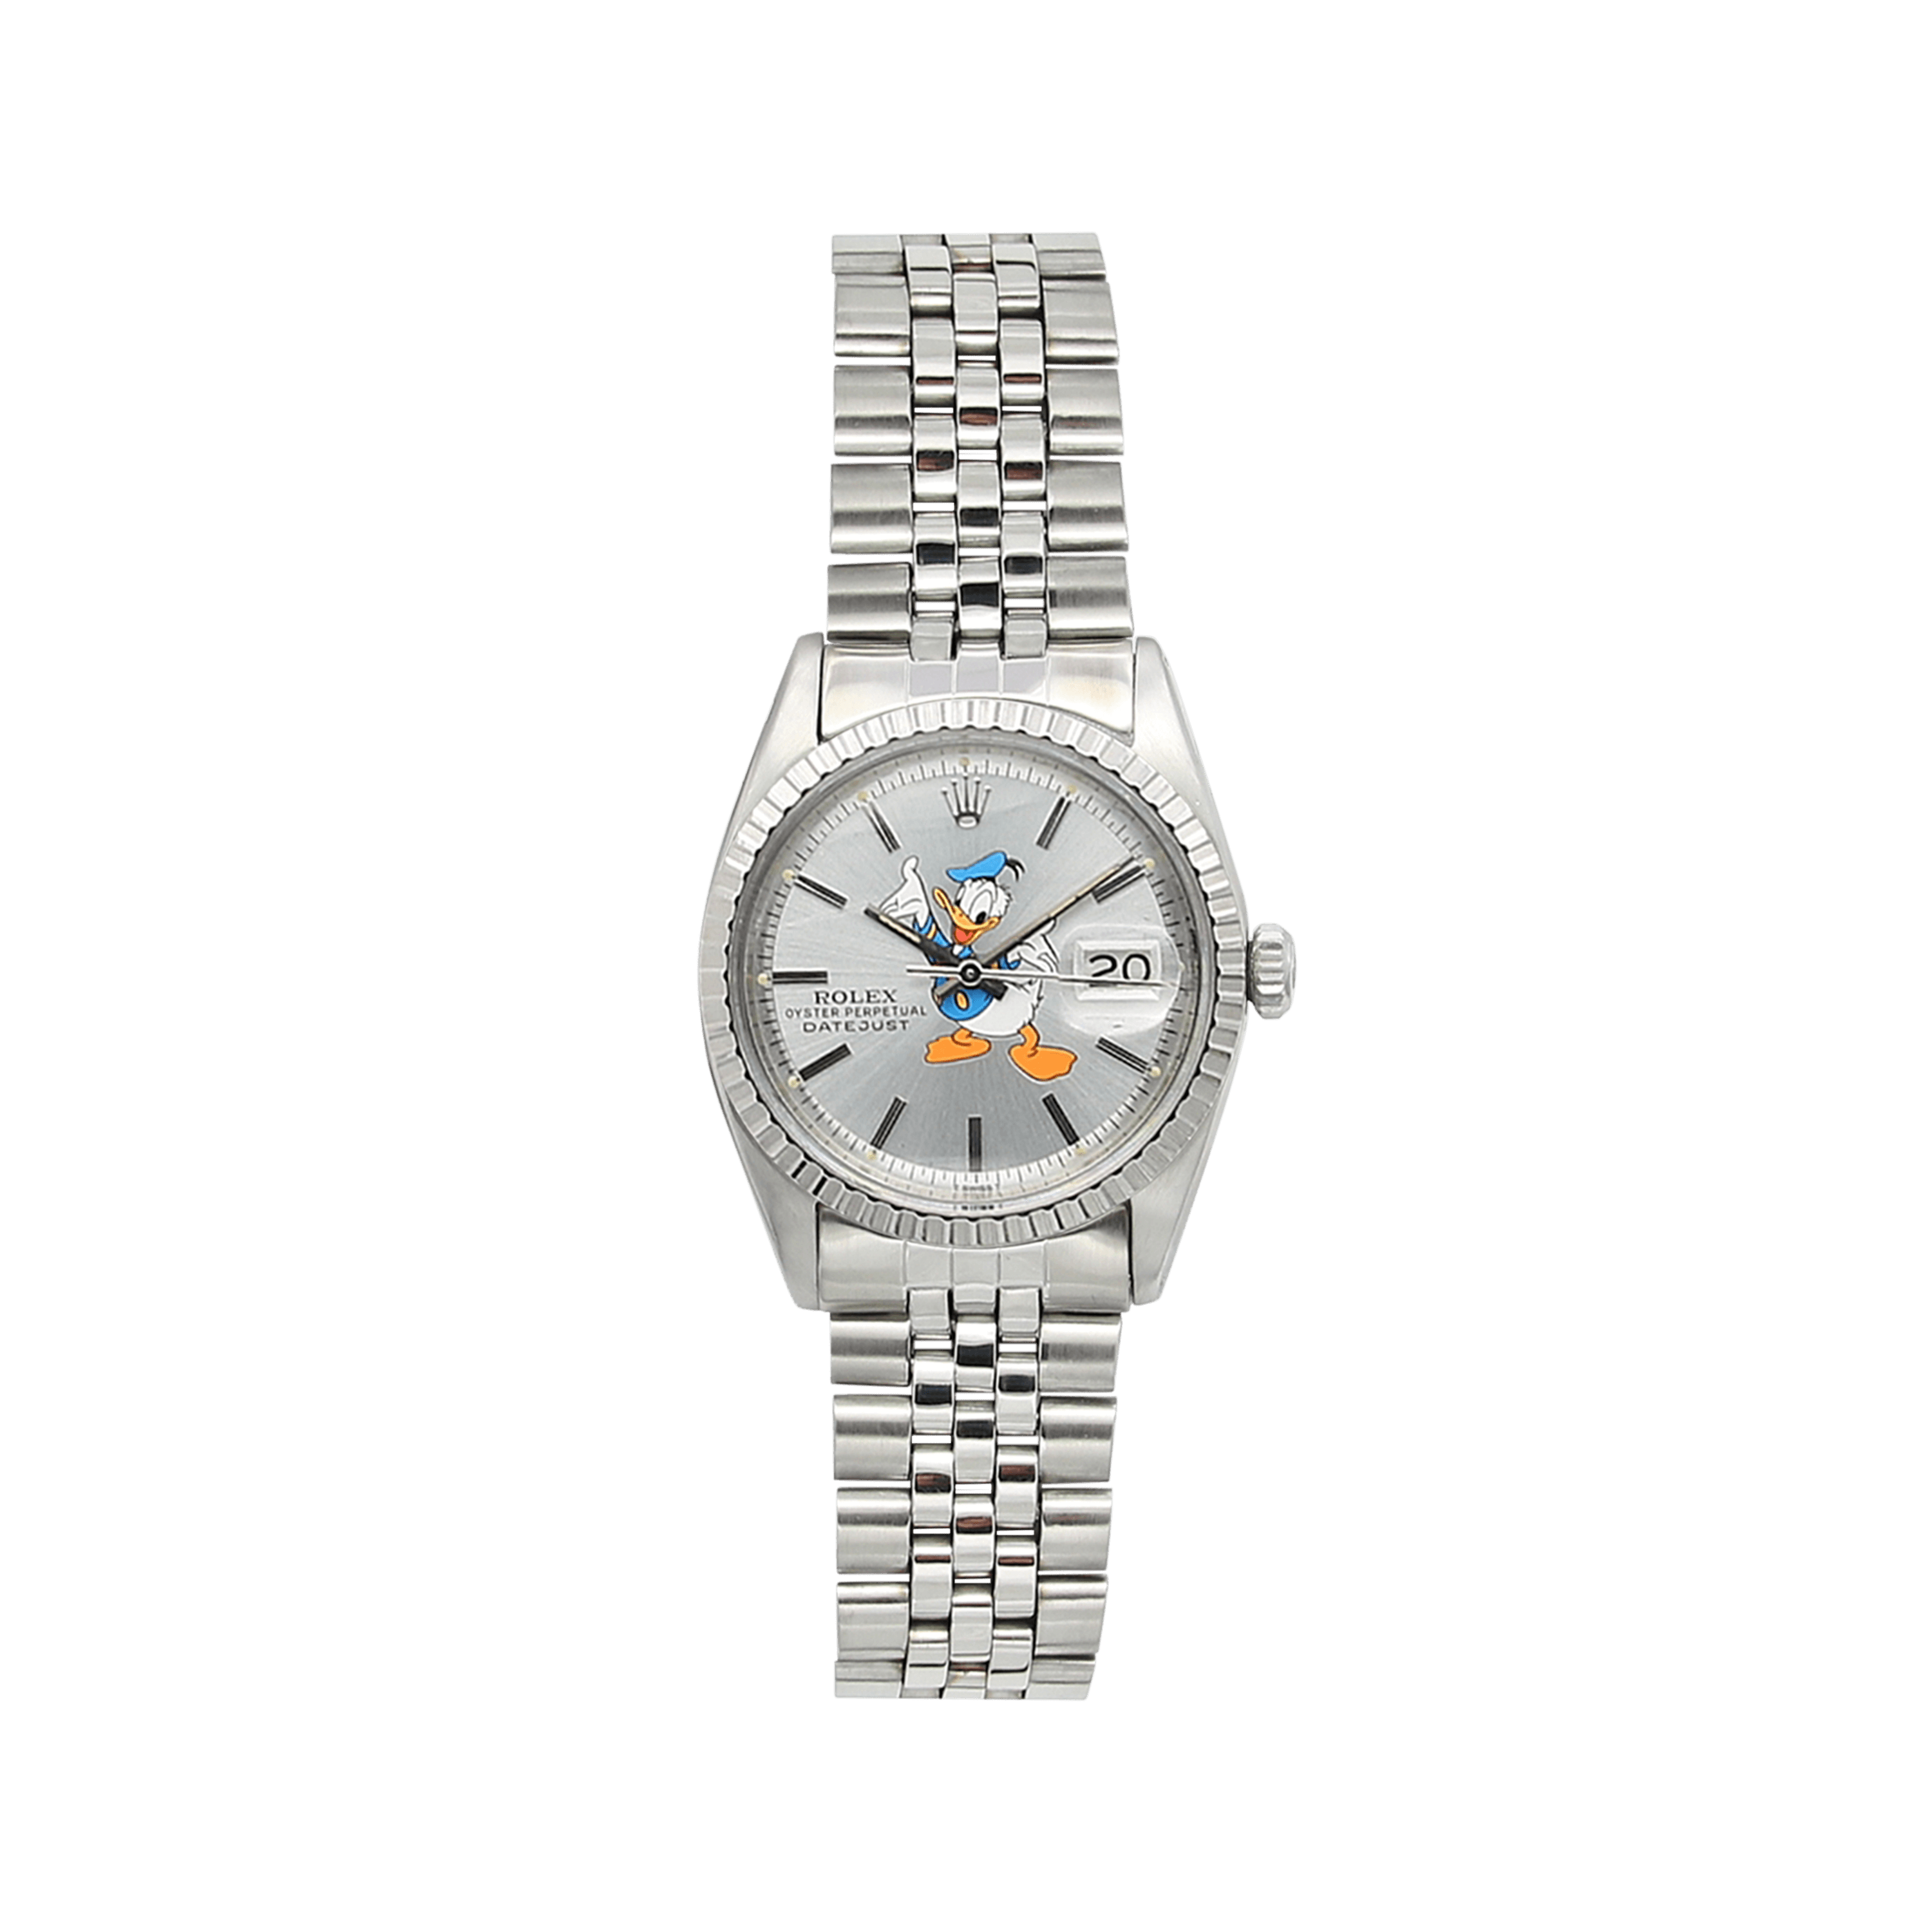 Rolex Datejust ref 1603 Silver Donald Dial